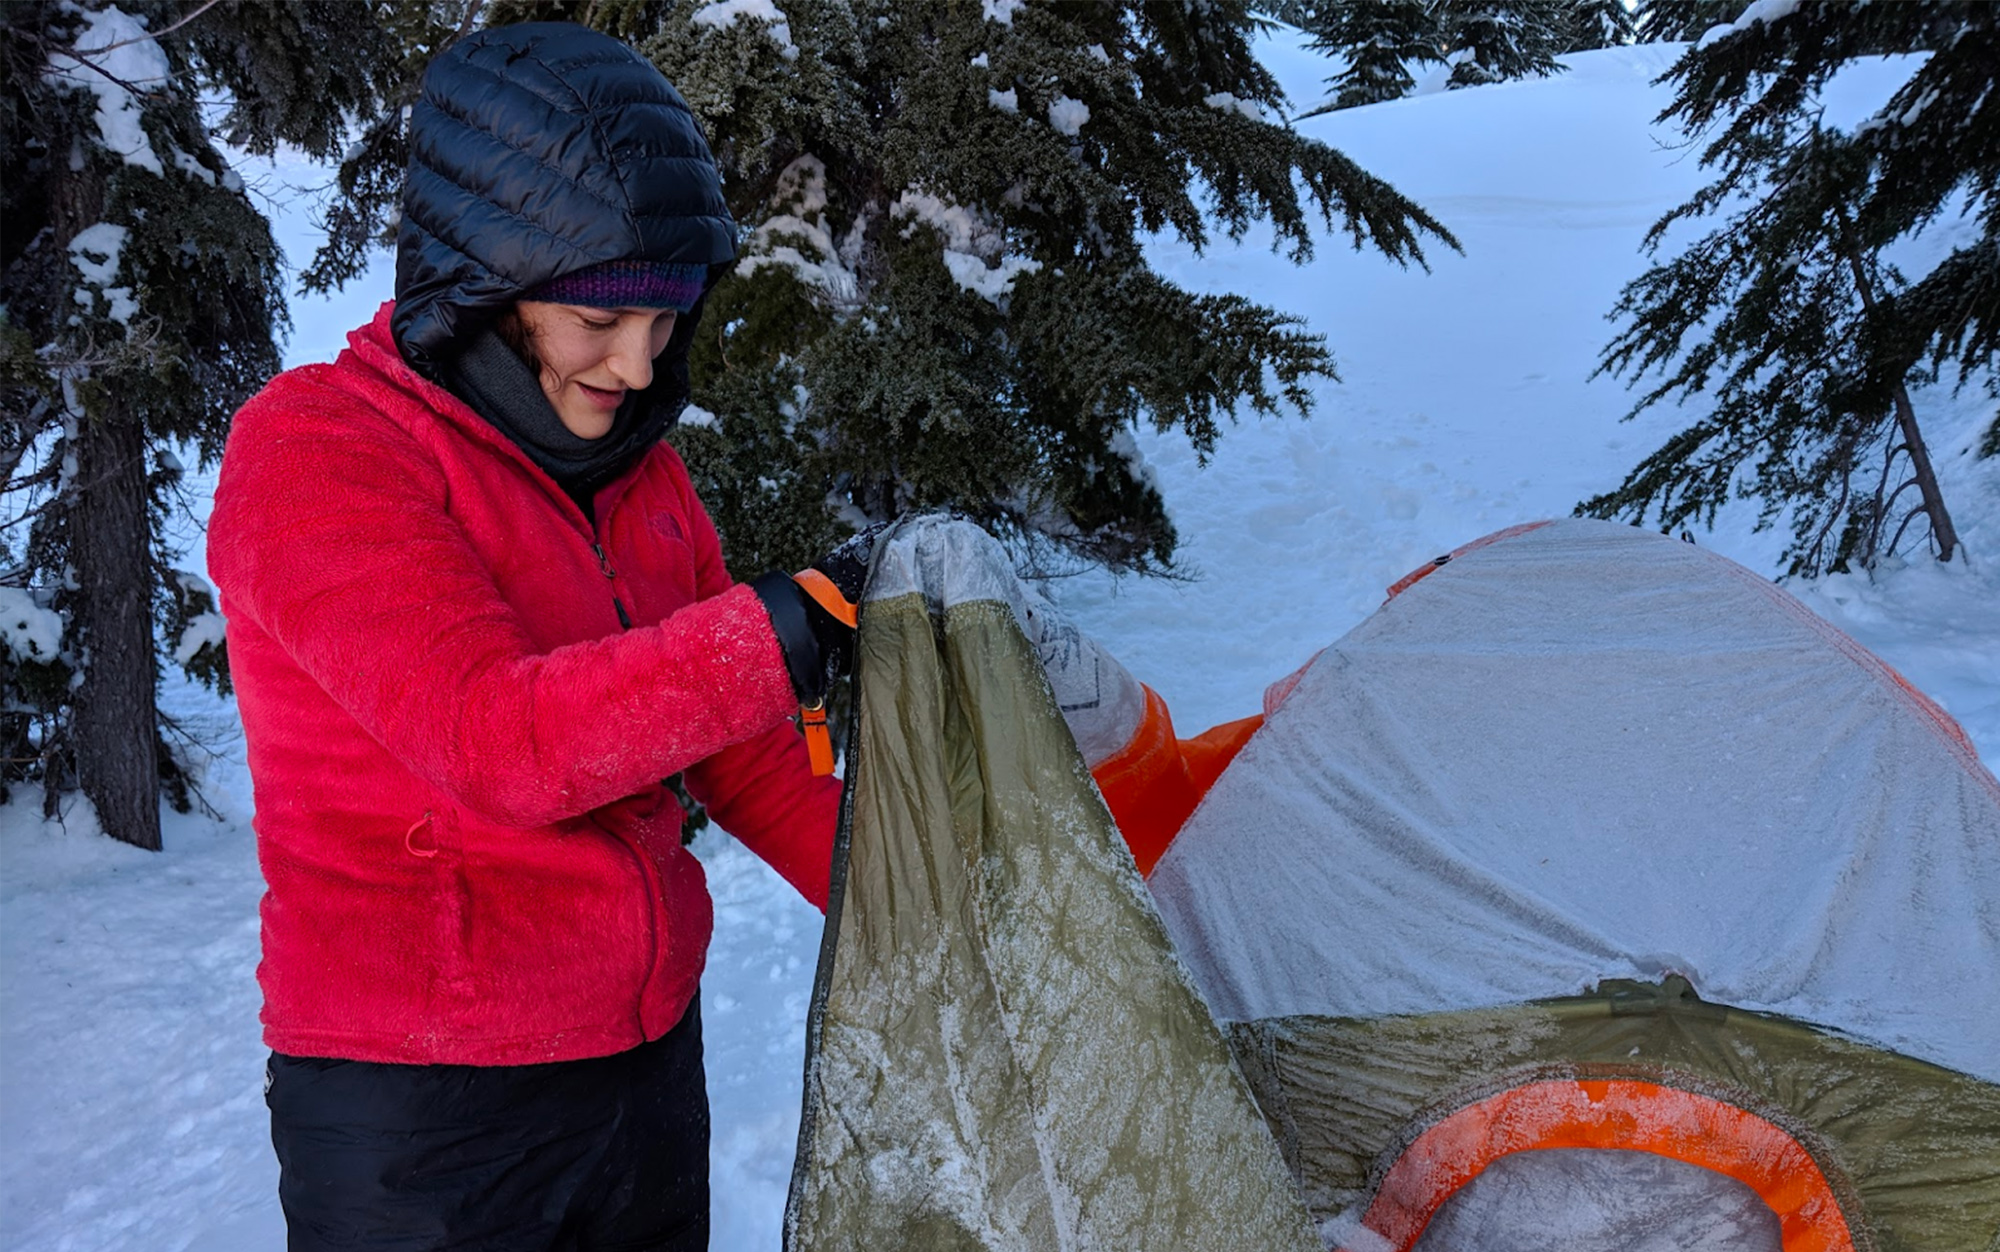 Always nice to have a fast-acting hand warmer to hold onto after setting up your tent while winter backpacking.